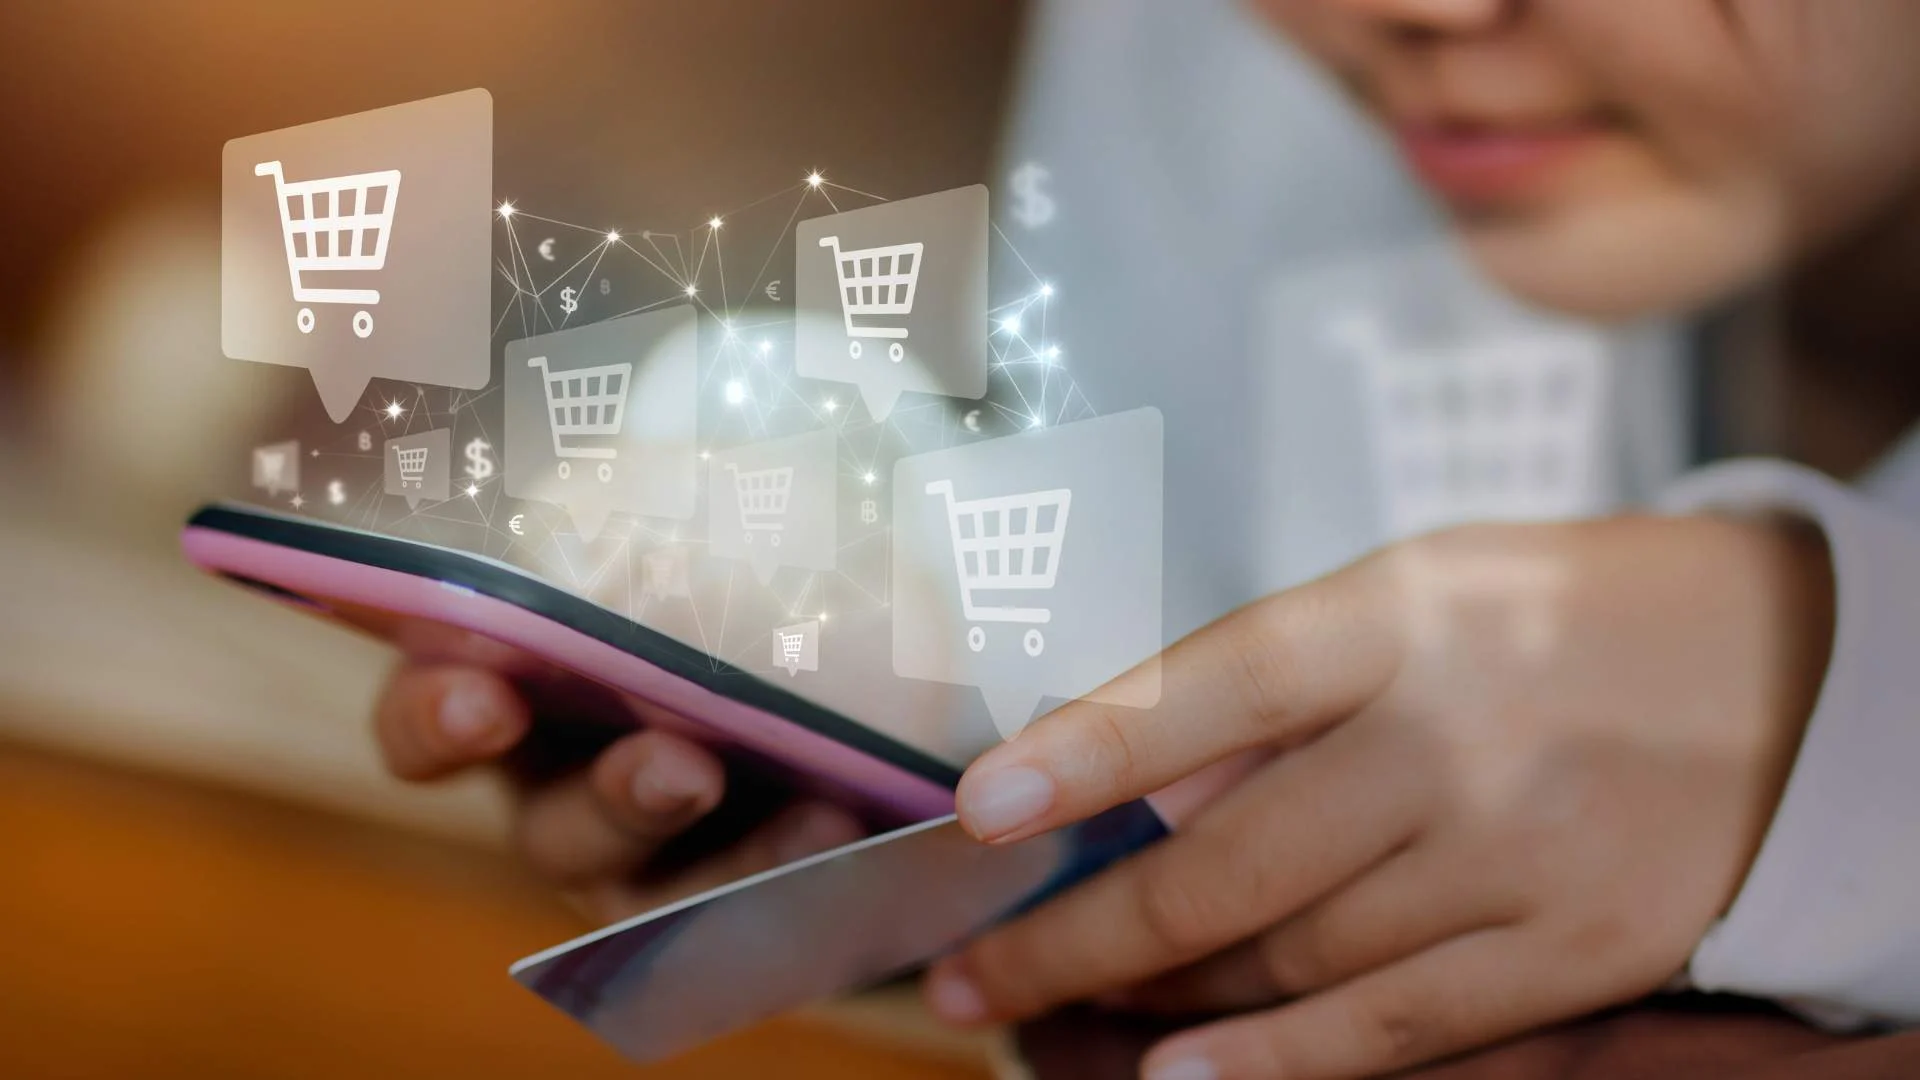 New E-commerce Startup Empowers Customers With Control Of Their Shopping Data